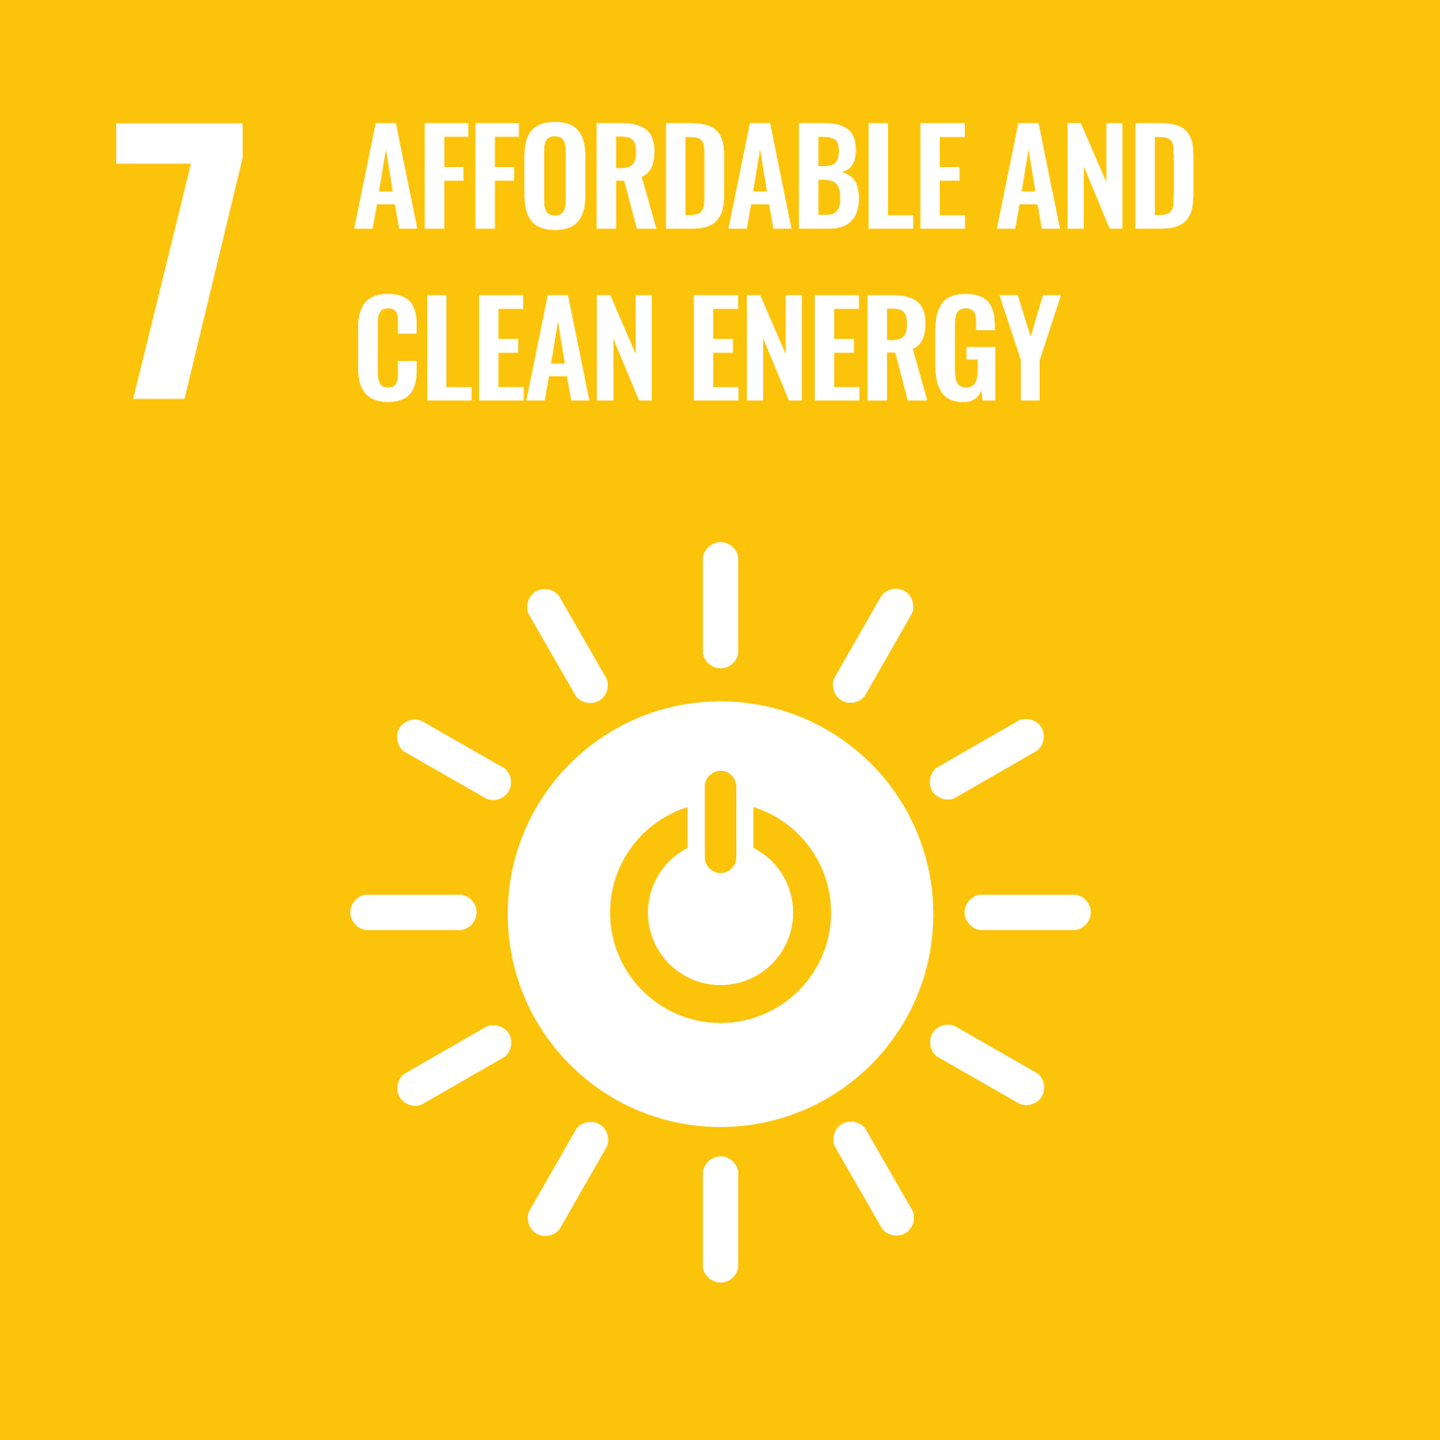 Sustainable Development Goal #7 - Affordable and Clean Energy